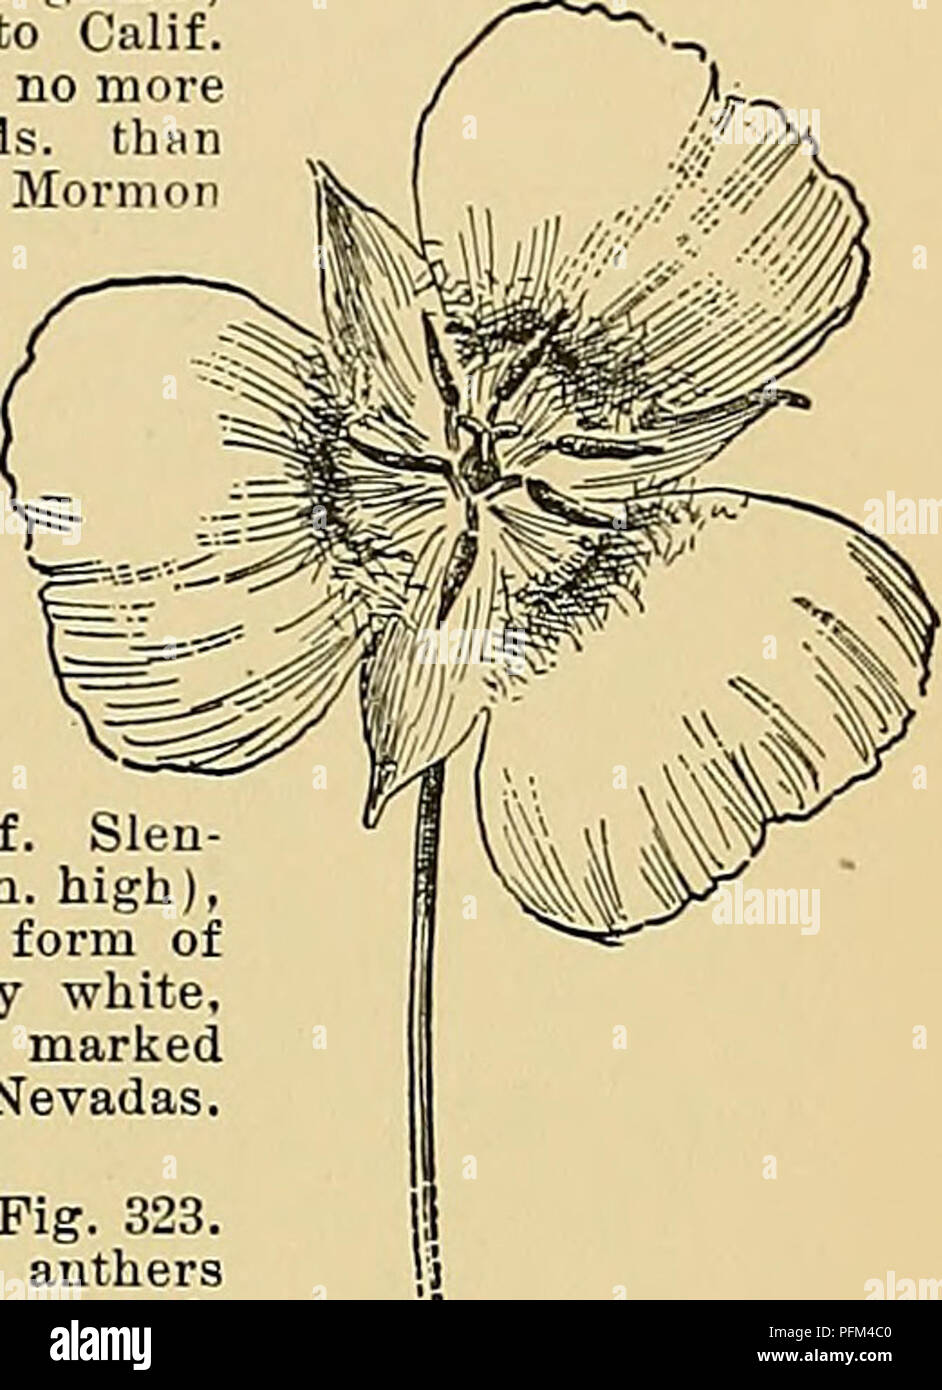 . Cyclopedia of American horticulture, comprising suggestions for cultivation of horticultural plants, descriptions of the species of fruits, vegetables, flowers, and ornamental plants sold in the United States and Canada, together with geographical and biographical sketches. Gardening. CALOCHORTUS CALOPHACA 221 22. atireua, Wats. Very low: petals yellow, not hairy, the hairy gland purple-bordered. S. Utah. 23. clavitus, Wats. Petals yellow lined with brown, the lower part bearing club-shaped (or clavate) hairs, the gland deep and circular ; anthers purple. Calif.â In this excellent sort we ha Stock Photo